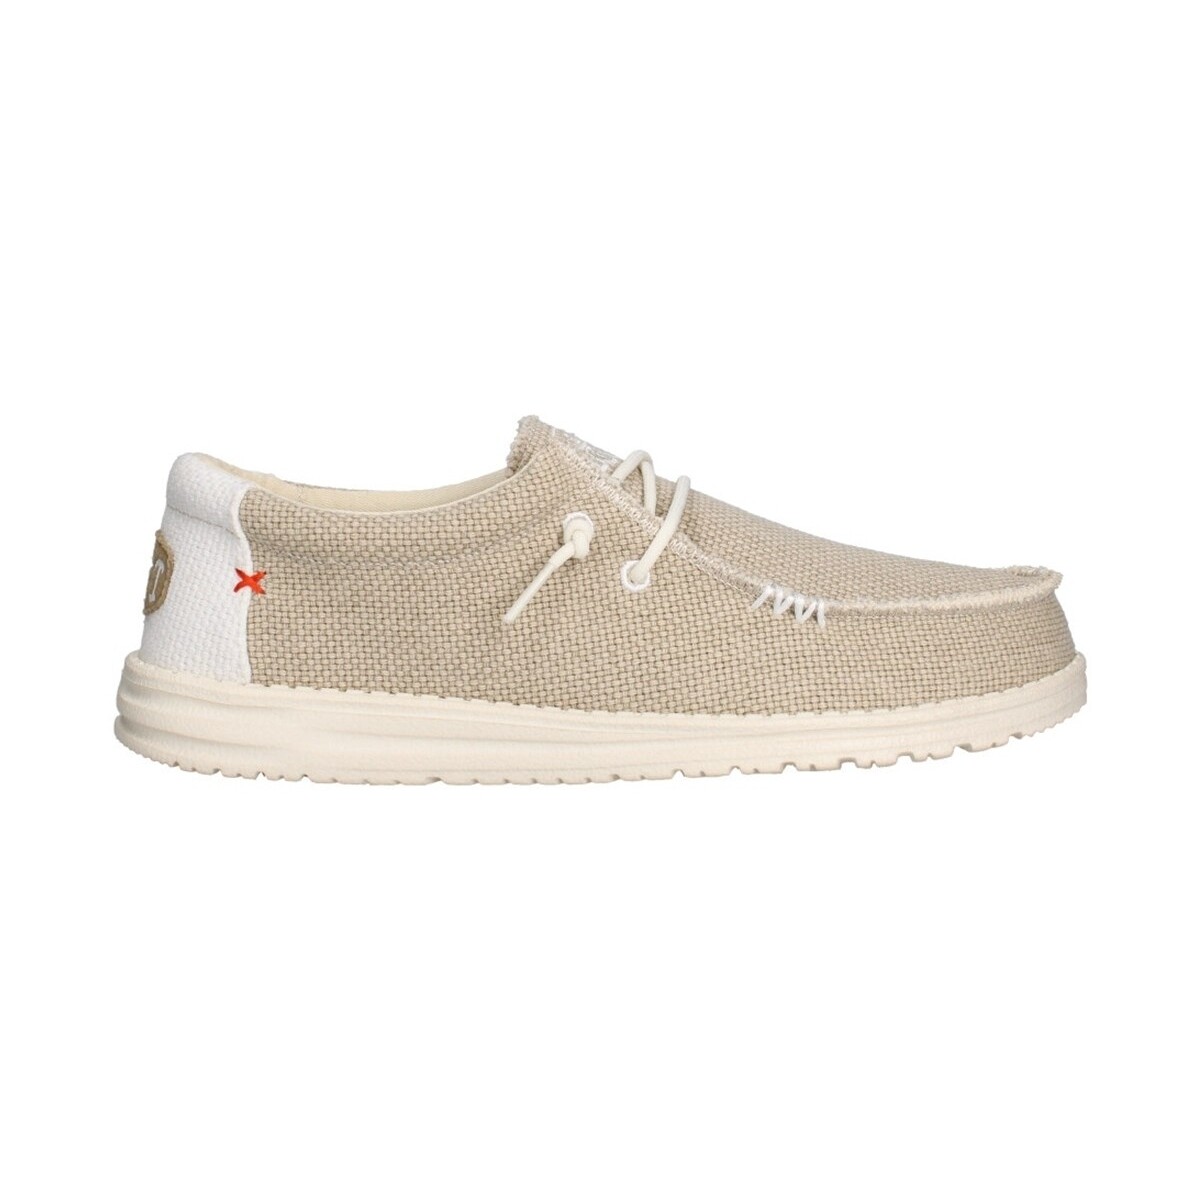 Chaussures Homme Mocassins HEY DUDE Wally Braided mocassin Homme Blanc cassé Blanc